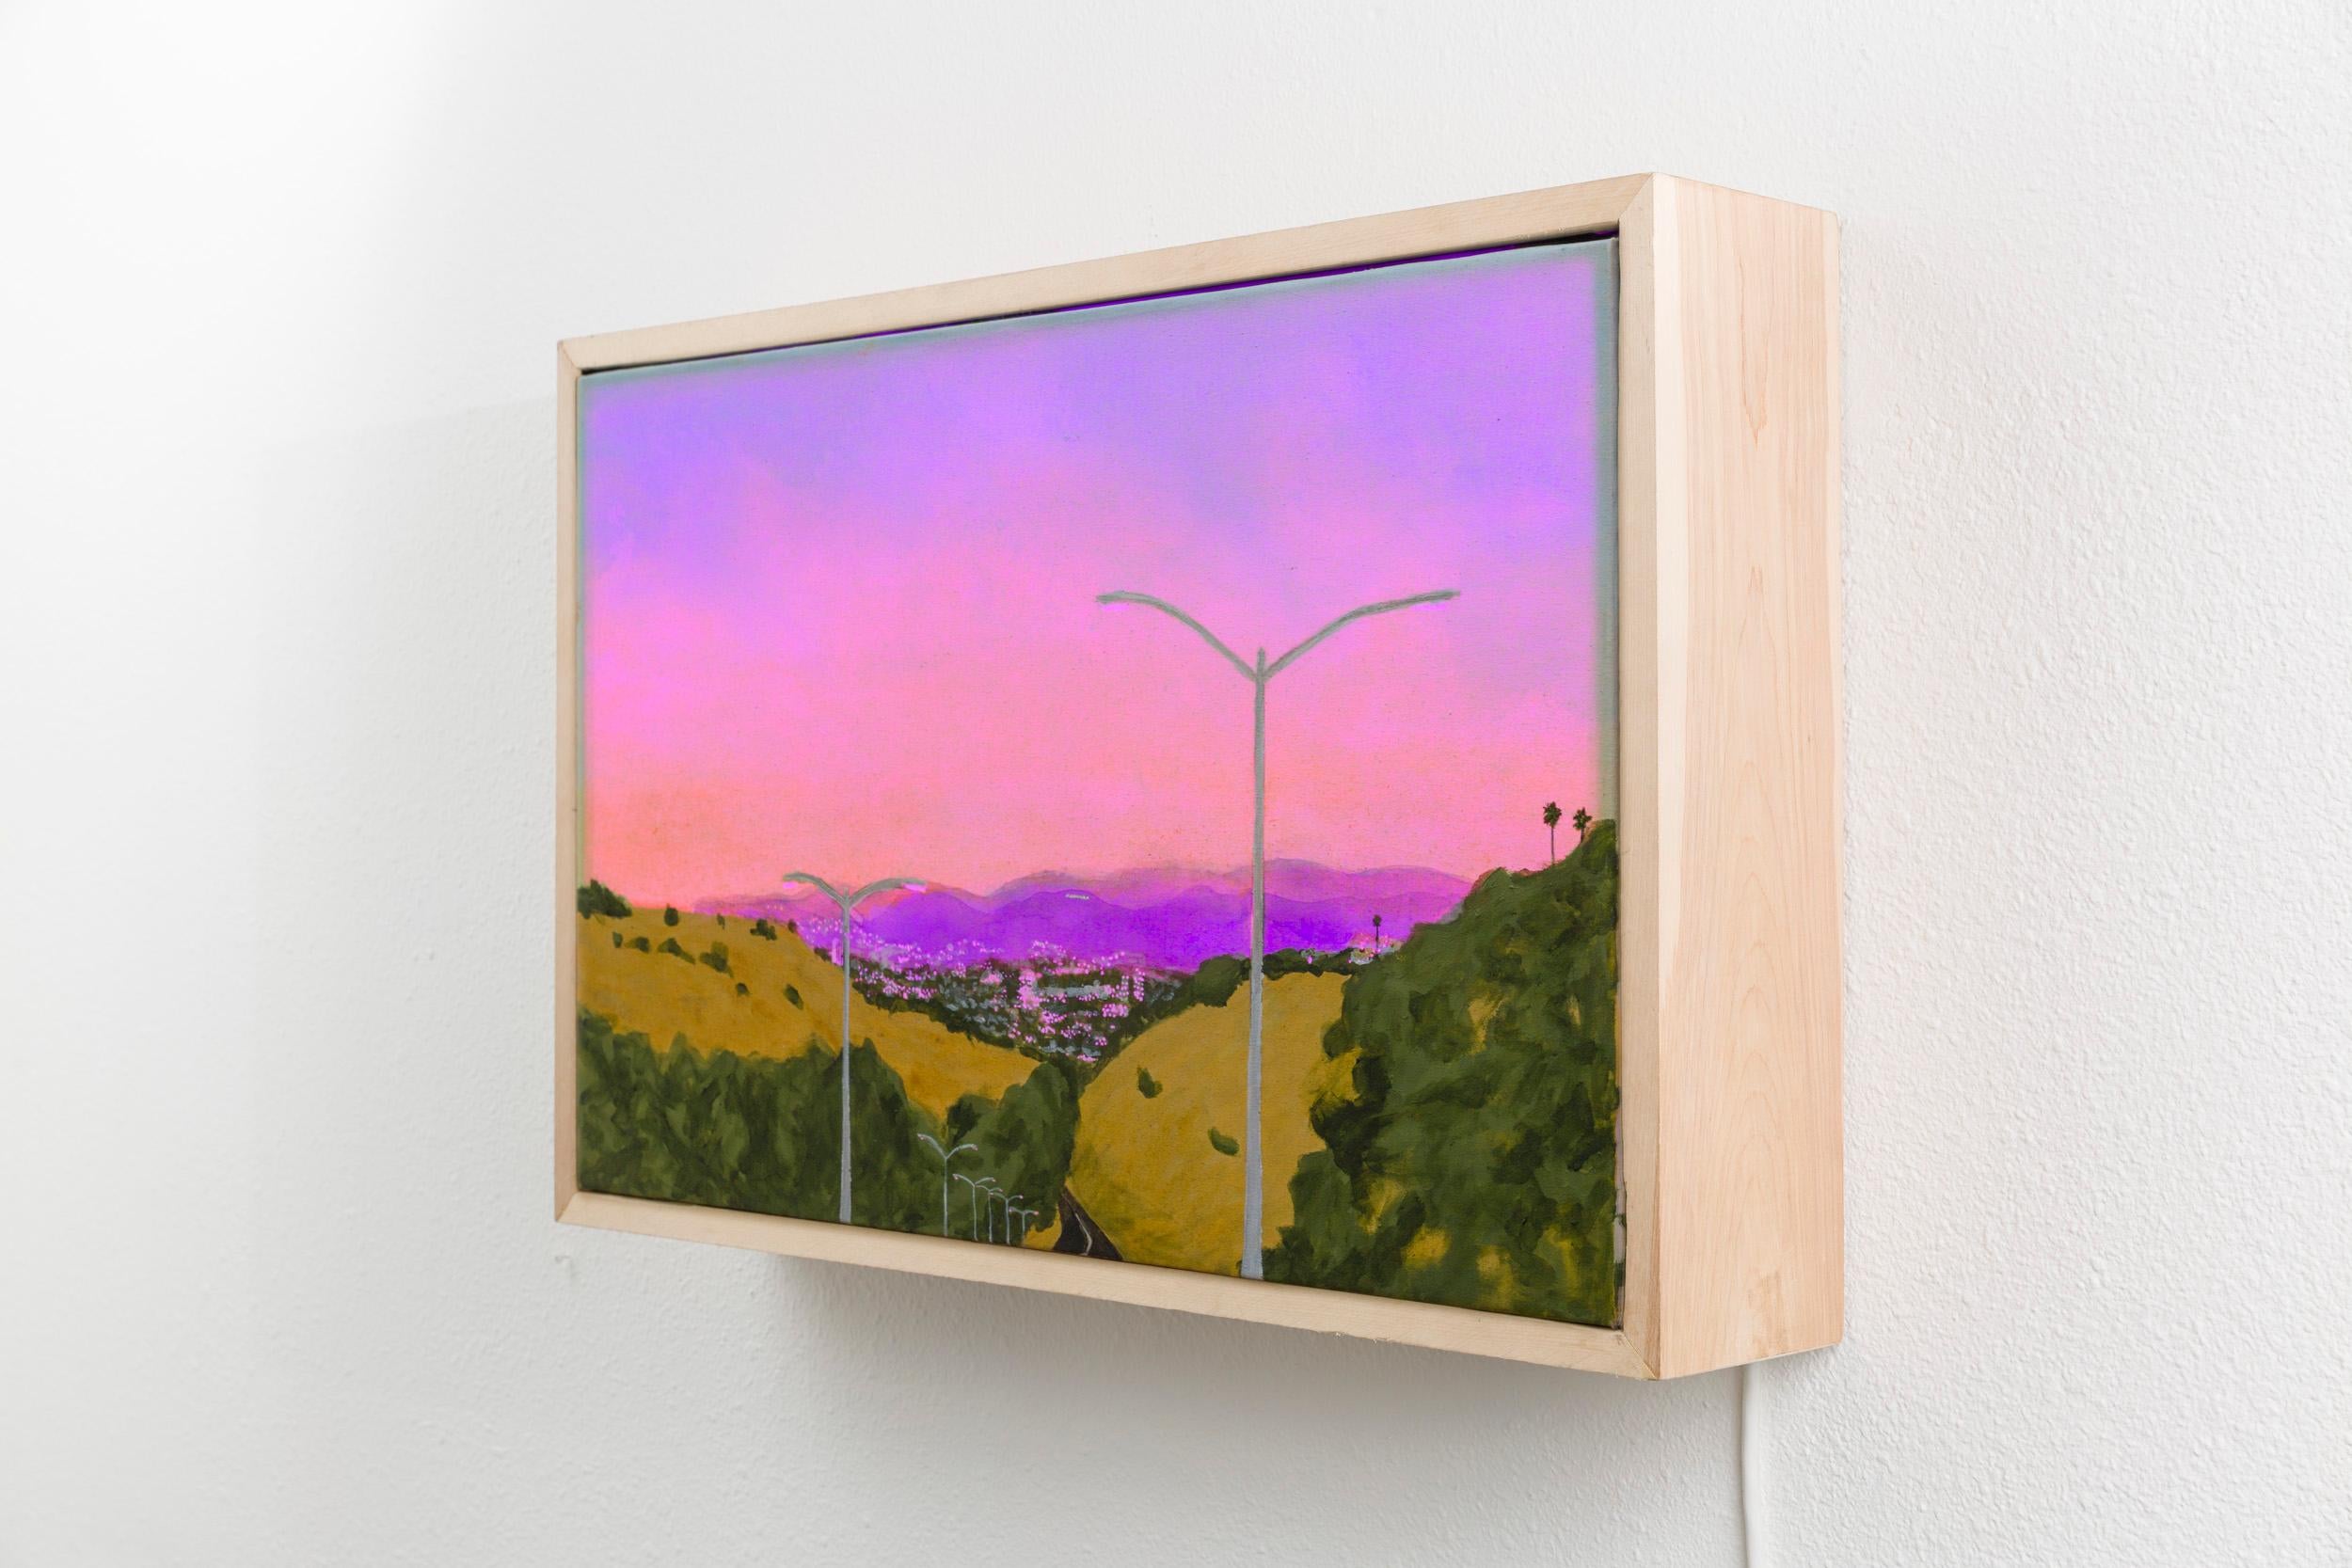 Artist Commentary:
This is a translucent backlit painting, with LED lights behind it, that changes from daytime to sunset as you watch it. It describes the dual reality of the smog-covered landscape and beautiful sunsets of Los Angeles. It is a